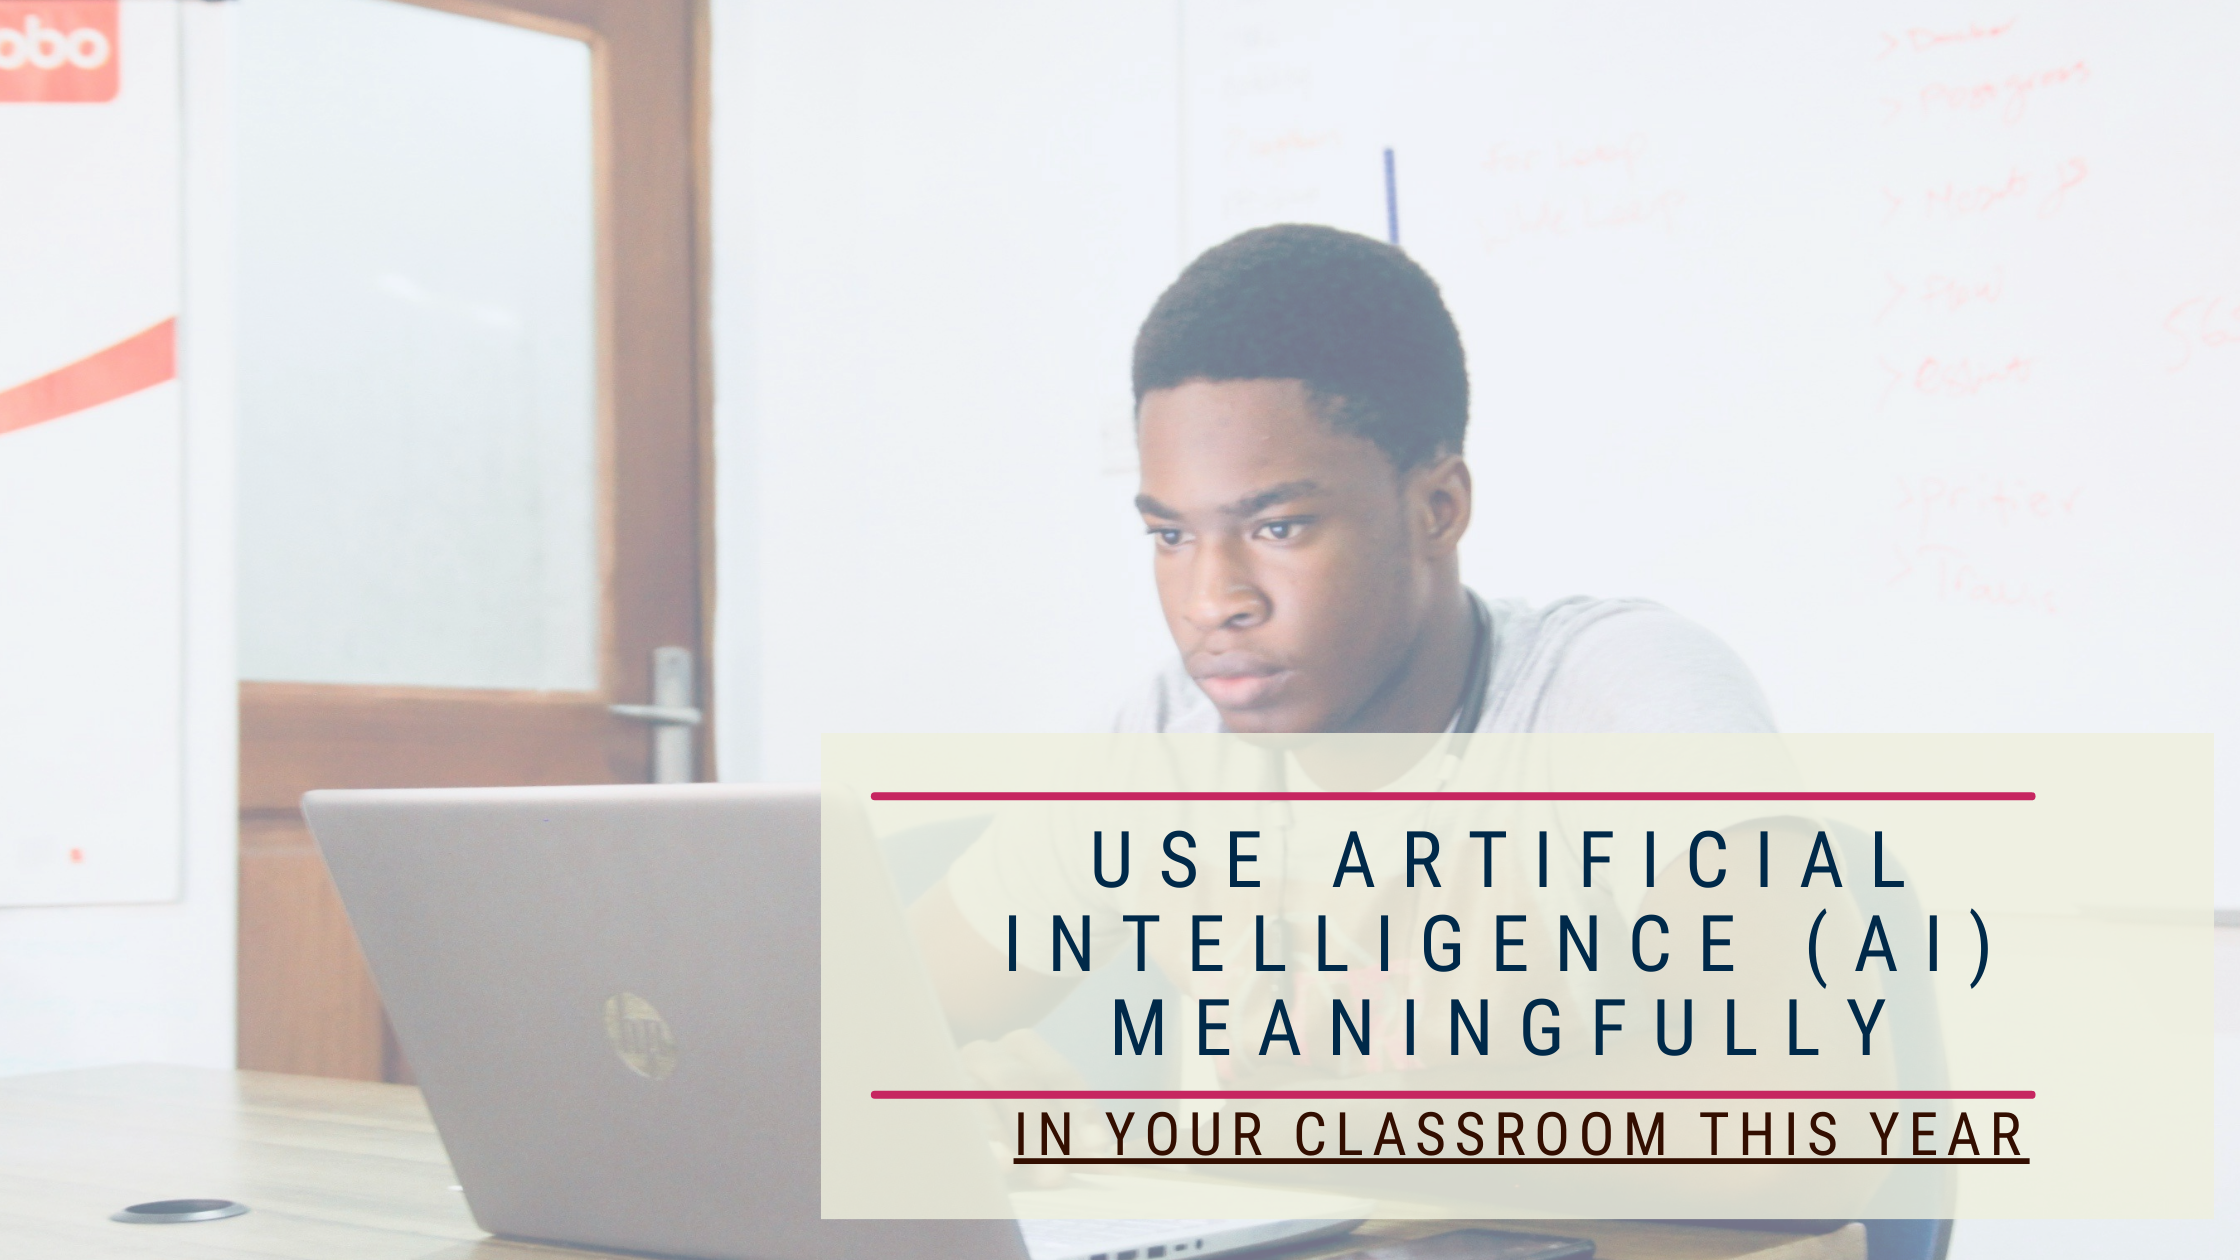 Use Artificial Intelligence (AI) Meaningfully in Your Classroom This Year